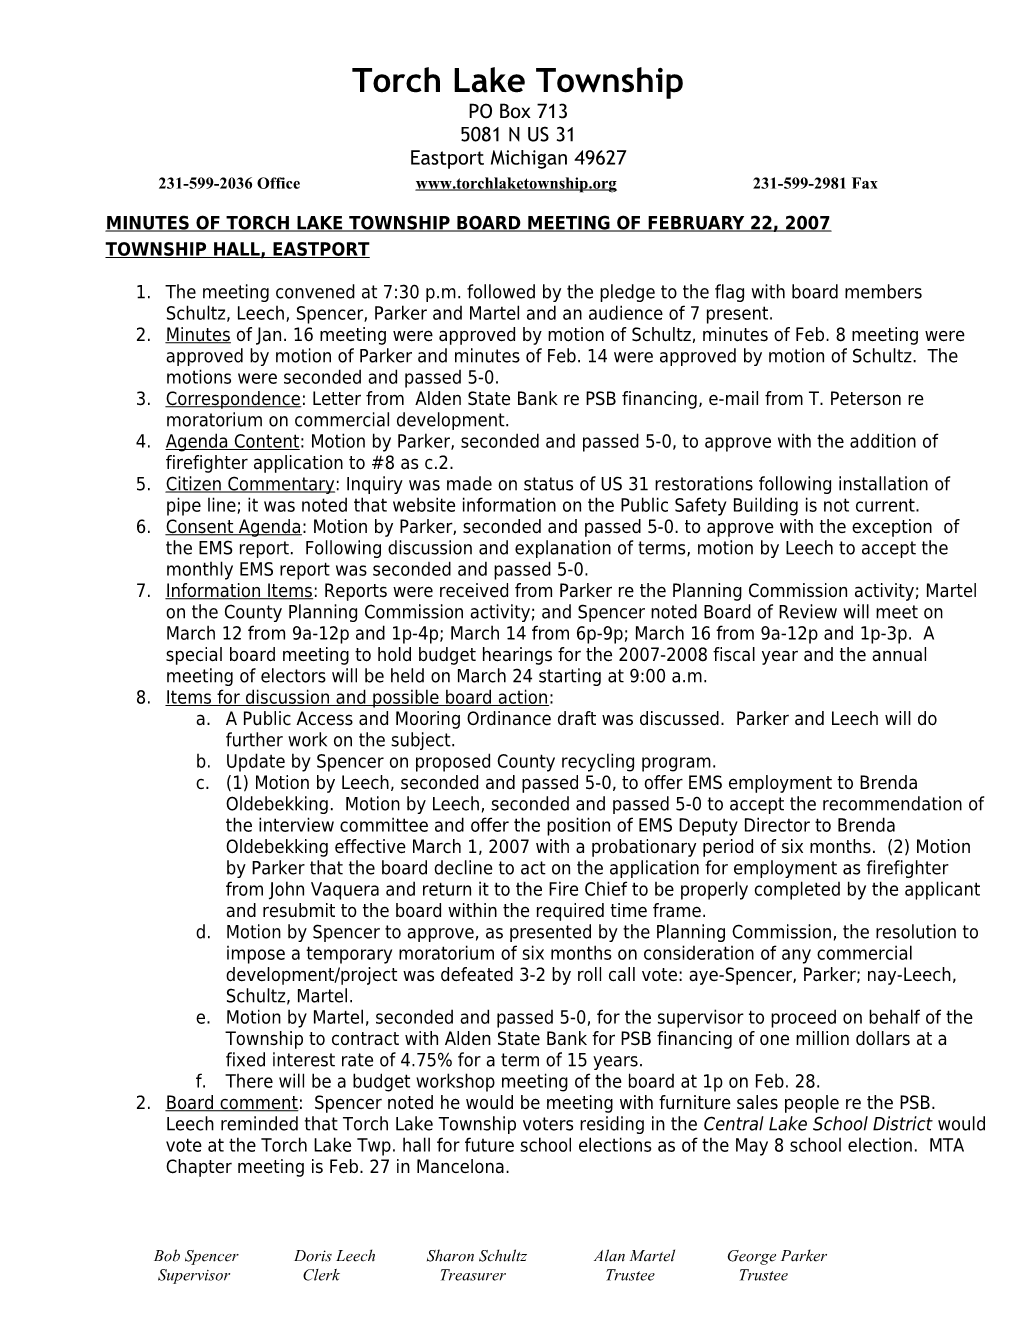 Minutes of Torch Lake Township Board Meeting of February 22, 2007